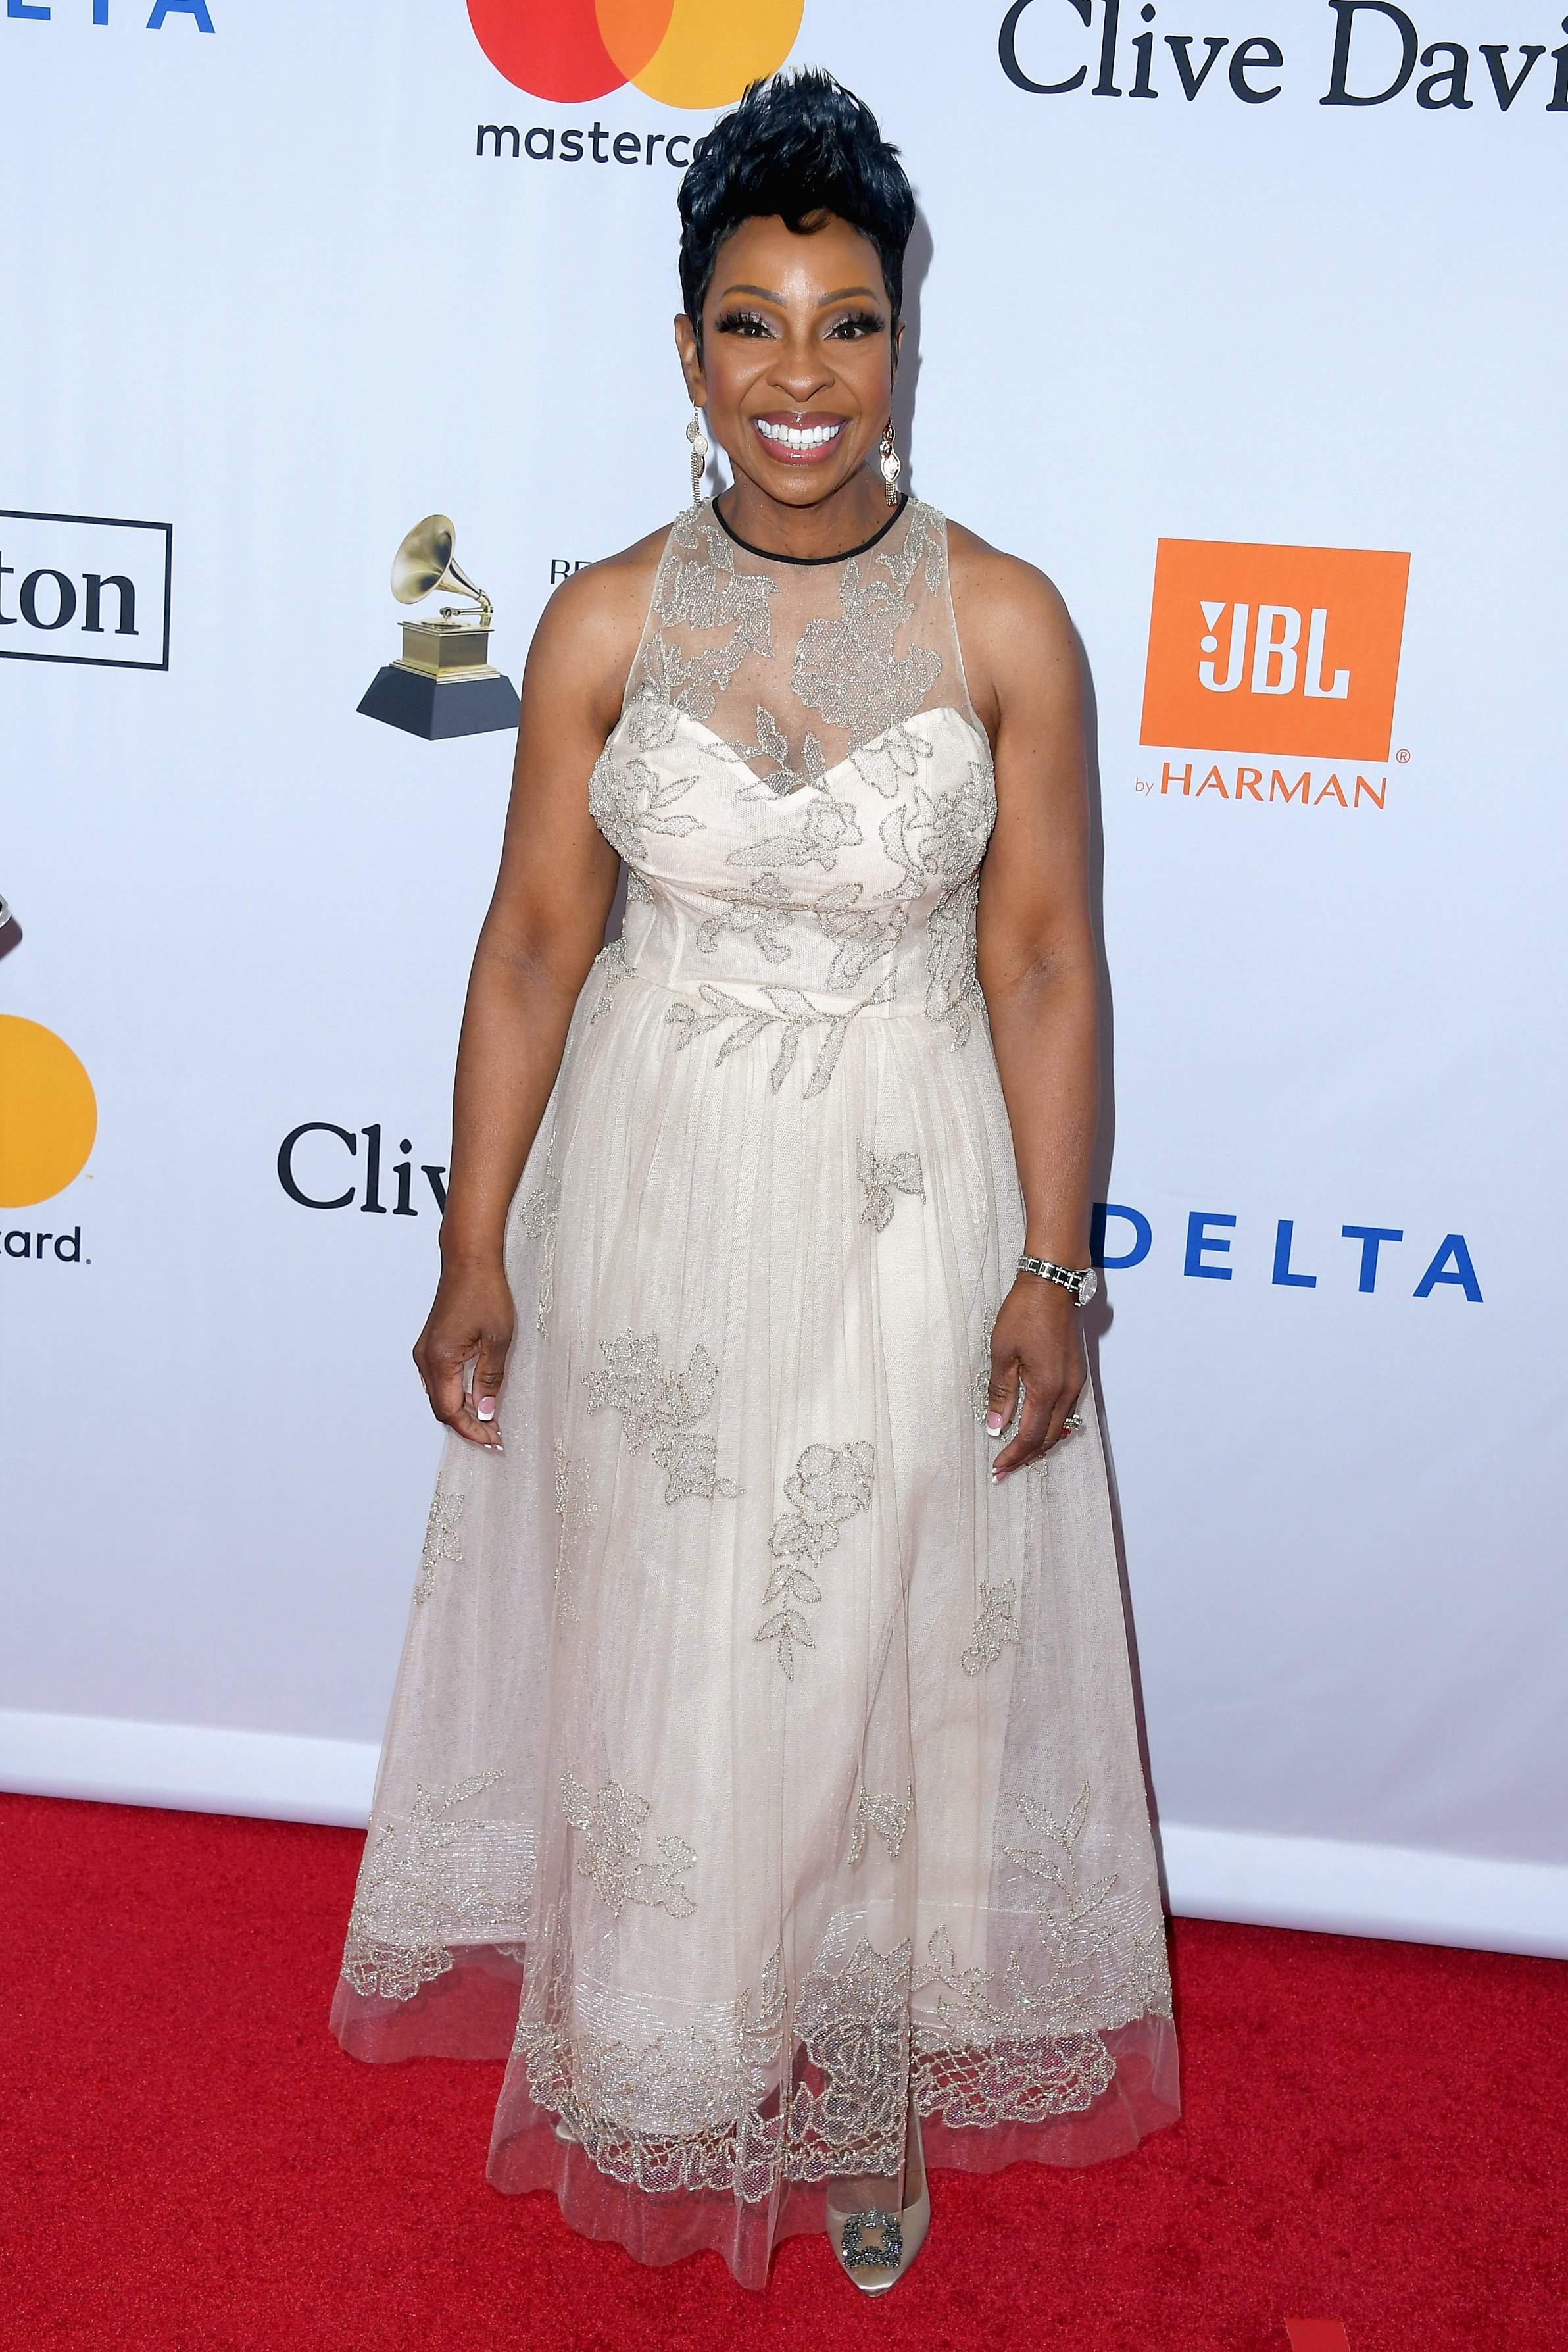 Gladys Knight attends the Clive Davis and Recording Academy Pre-GRAMMY Gala on January 27, 2018 in New York City. | Source: Getty Images